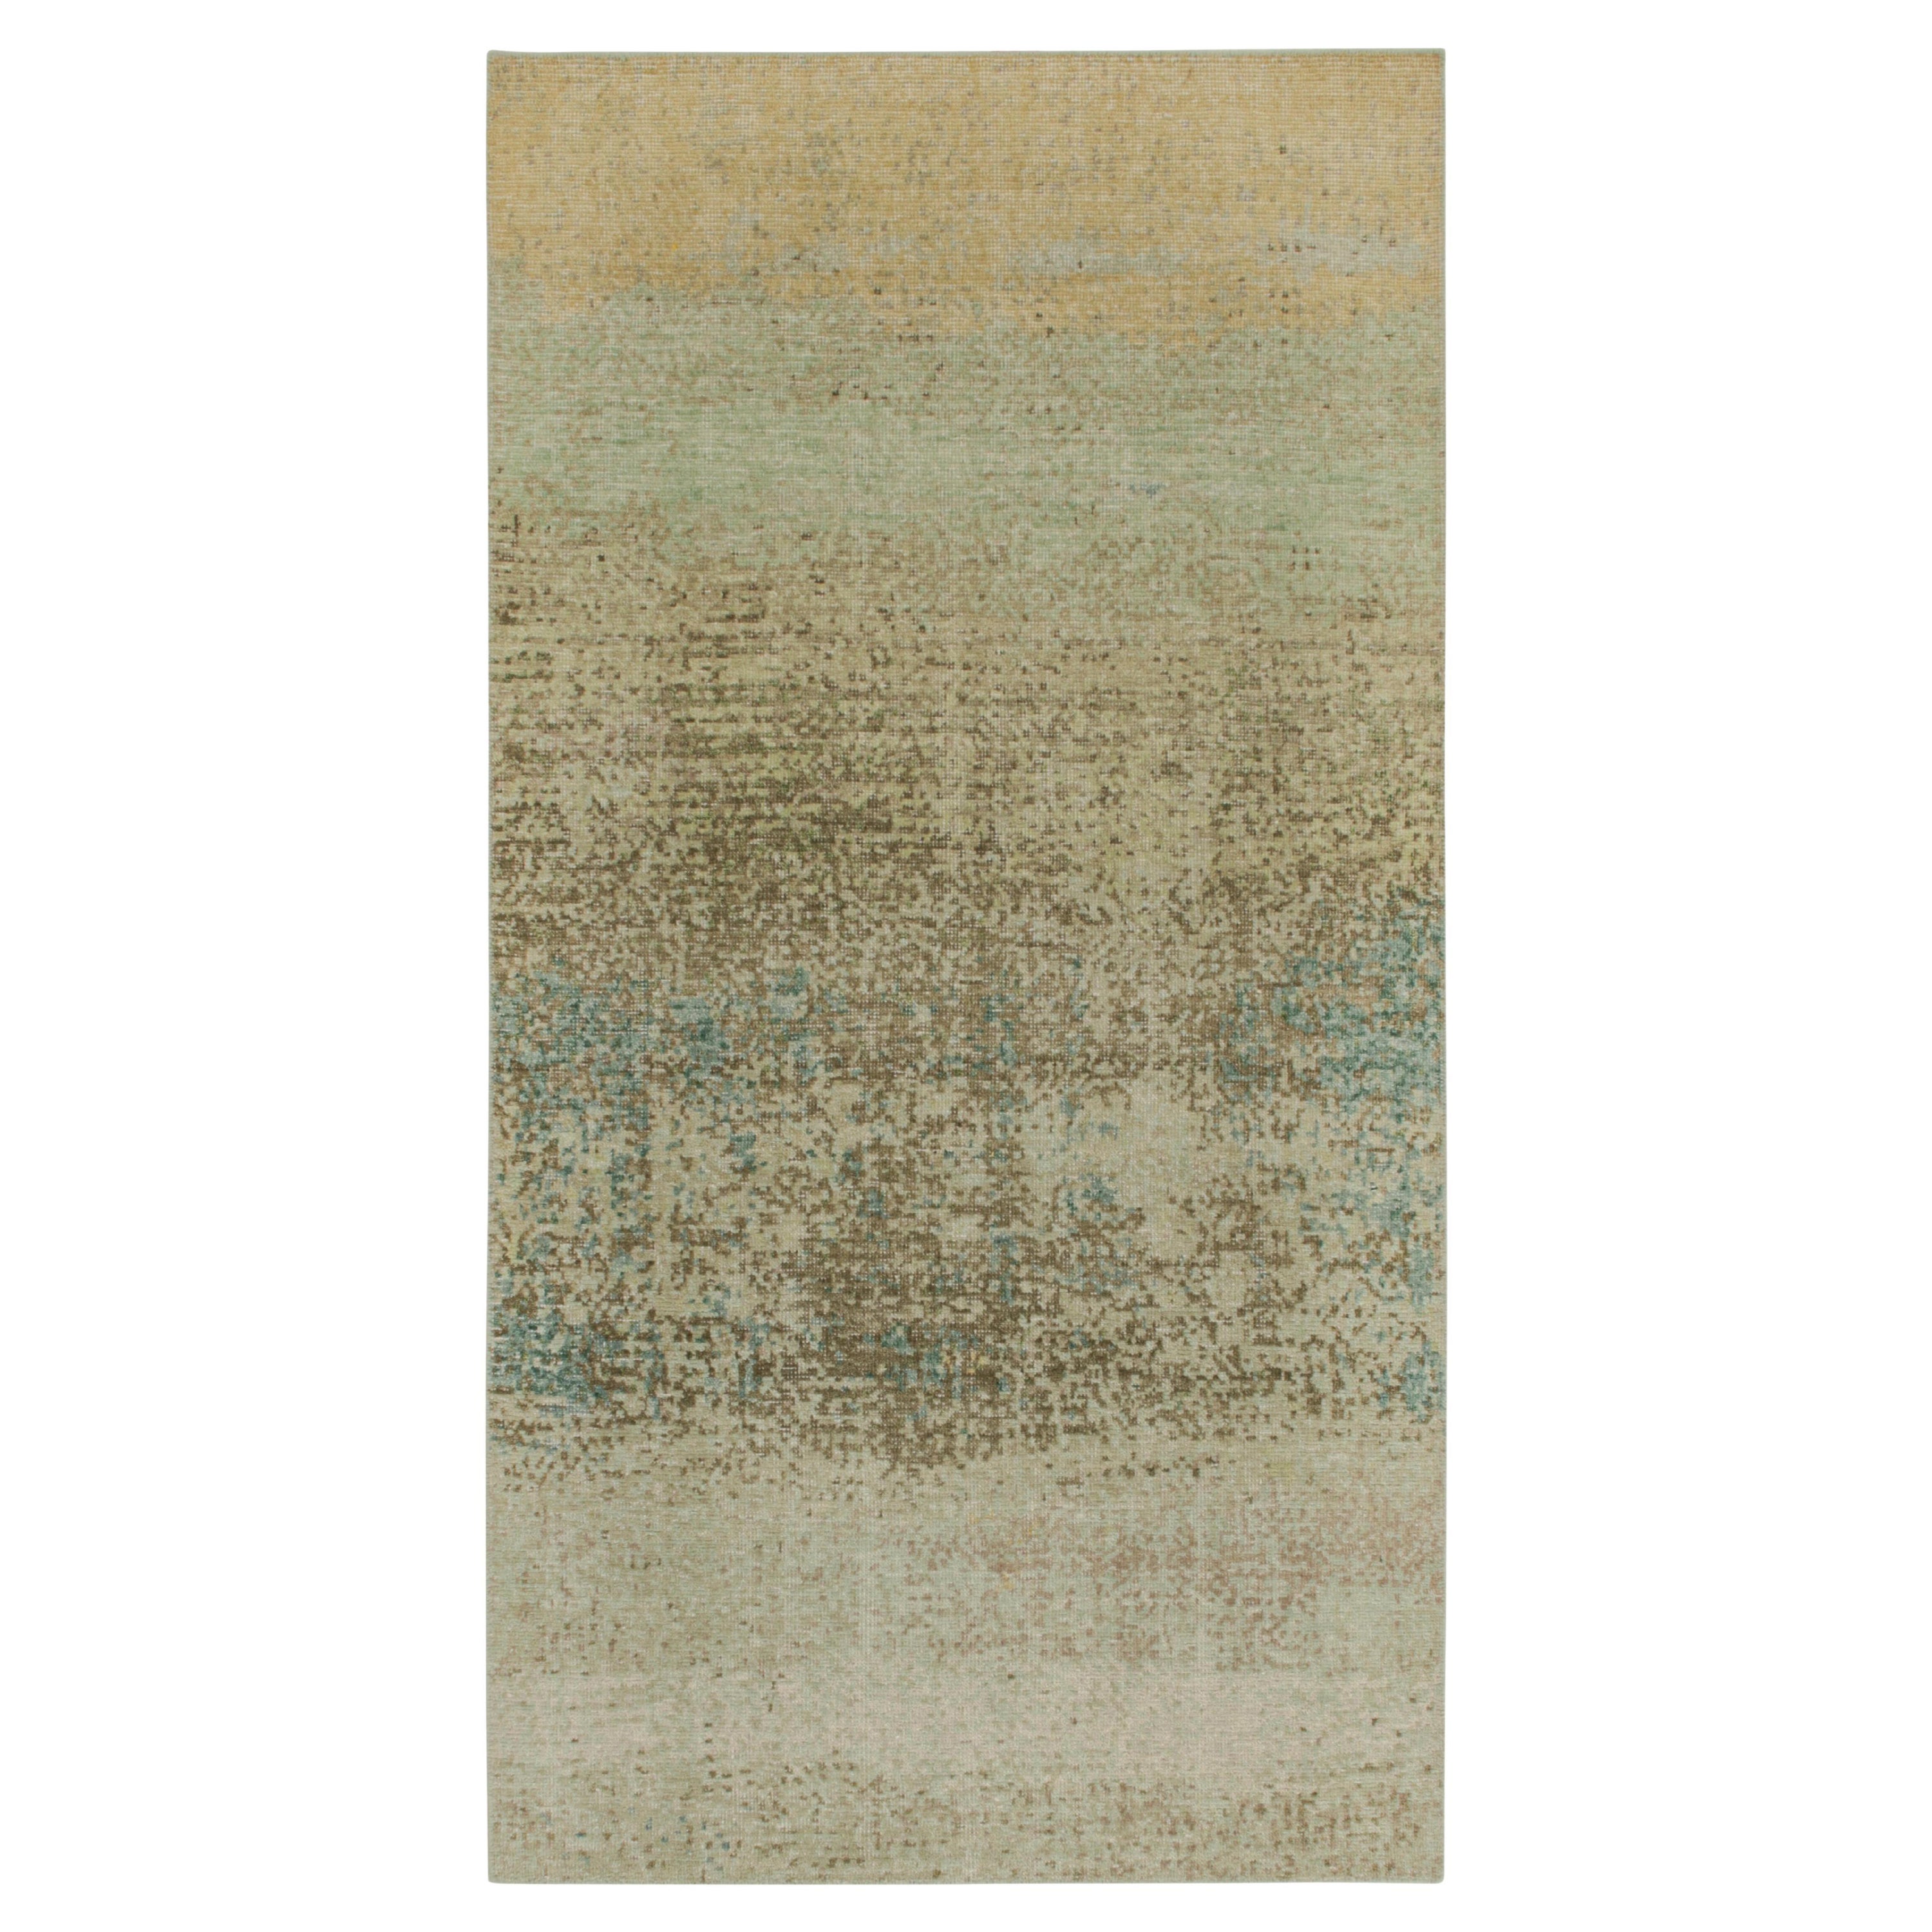 Rug & Kilim's Distressed Style Abstract Rug in Beige, Blue and Green Pattern (Tapis abstrait à motifs beige, bleu et vert)